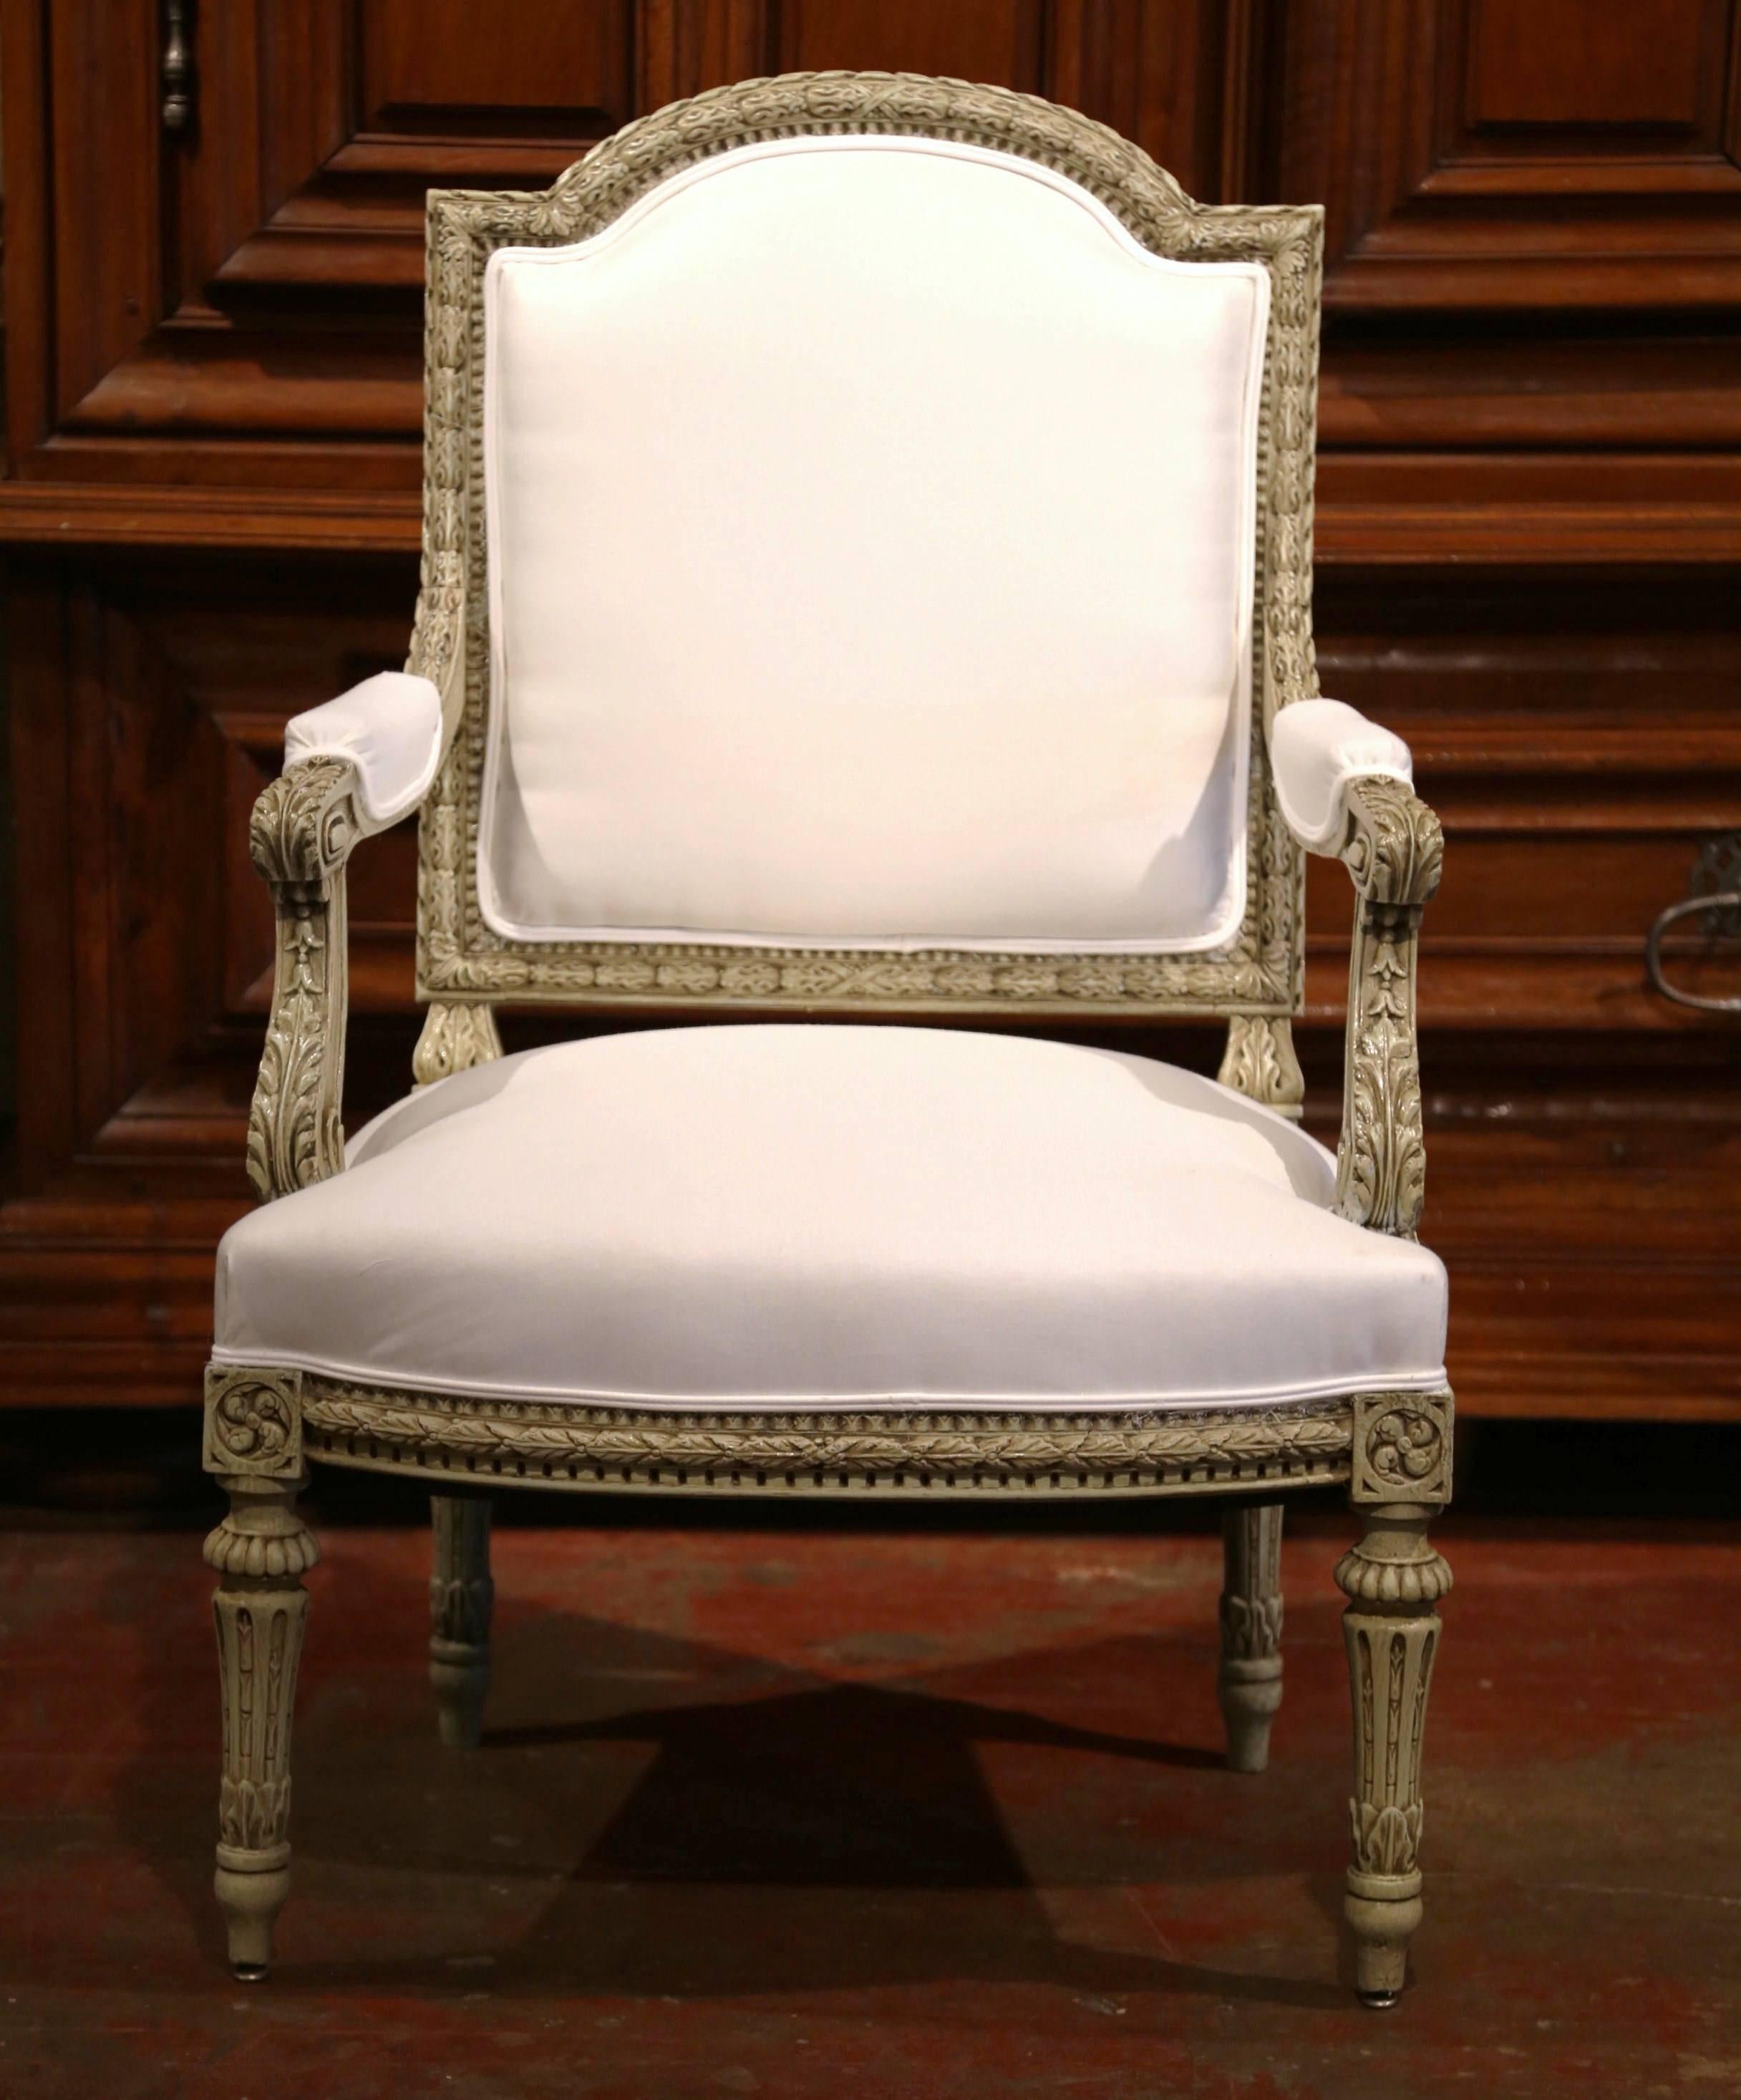 Elegant antique painted armchair from France; crafted circa 1880, the desk chair features intricate carving, tapered legs, armrests with acanthus leaves, and it has been reupholstered with white muslin. Excellent condition with rich patinated grey